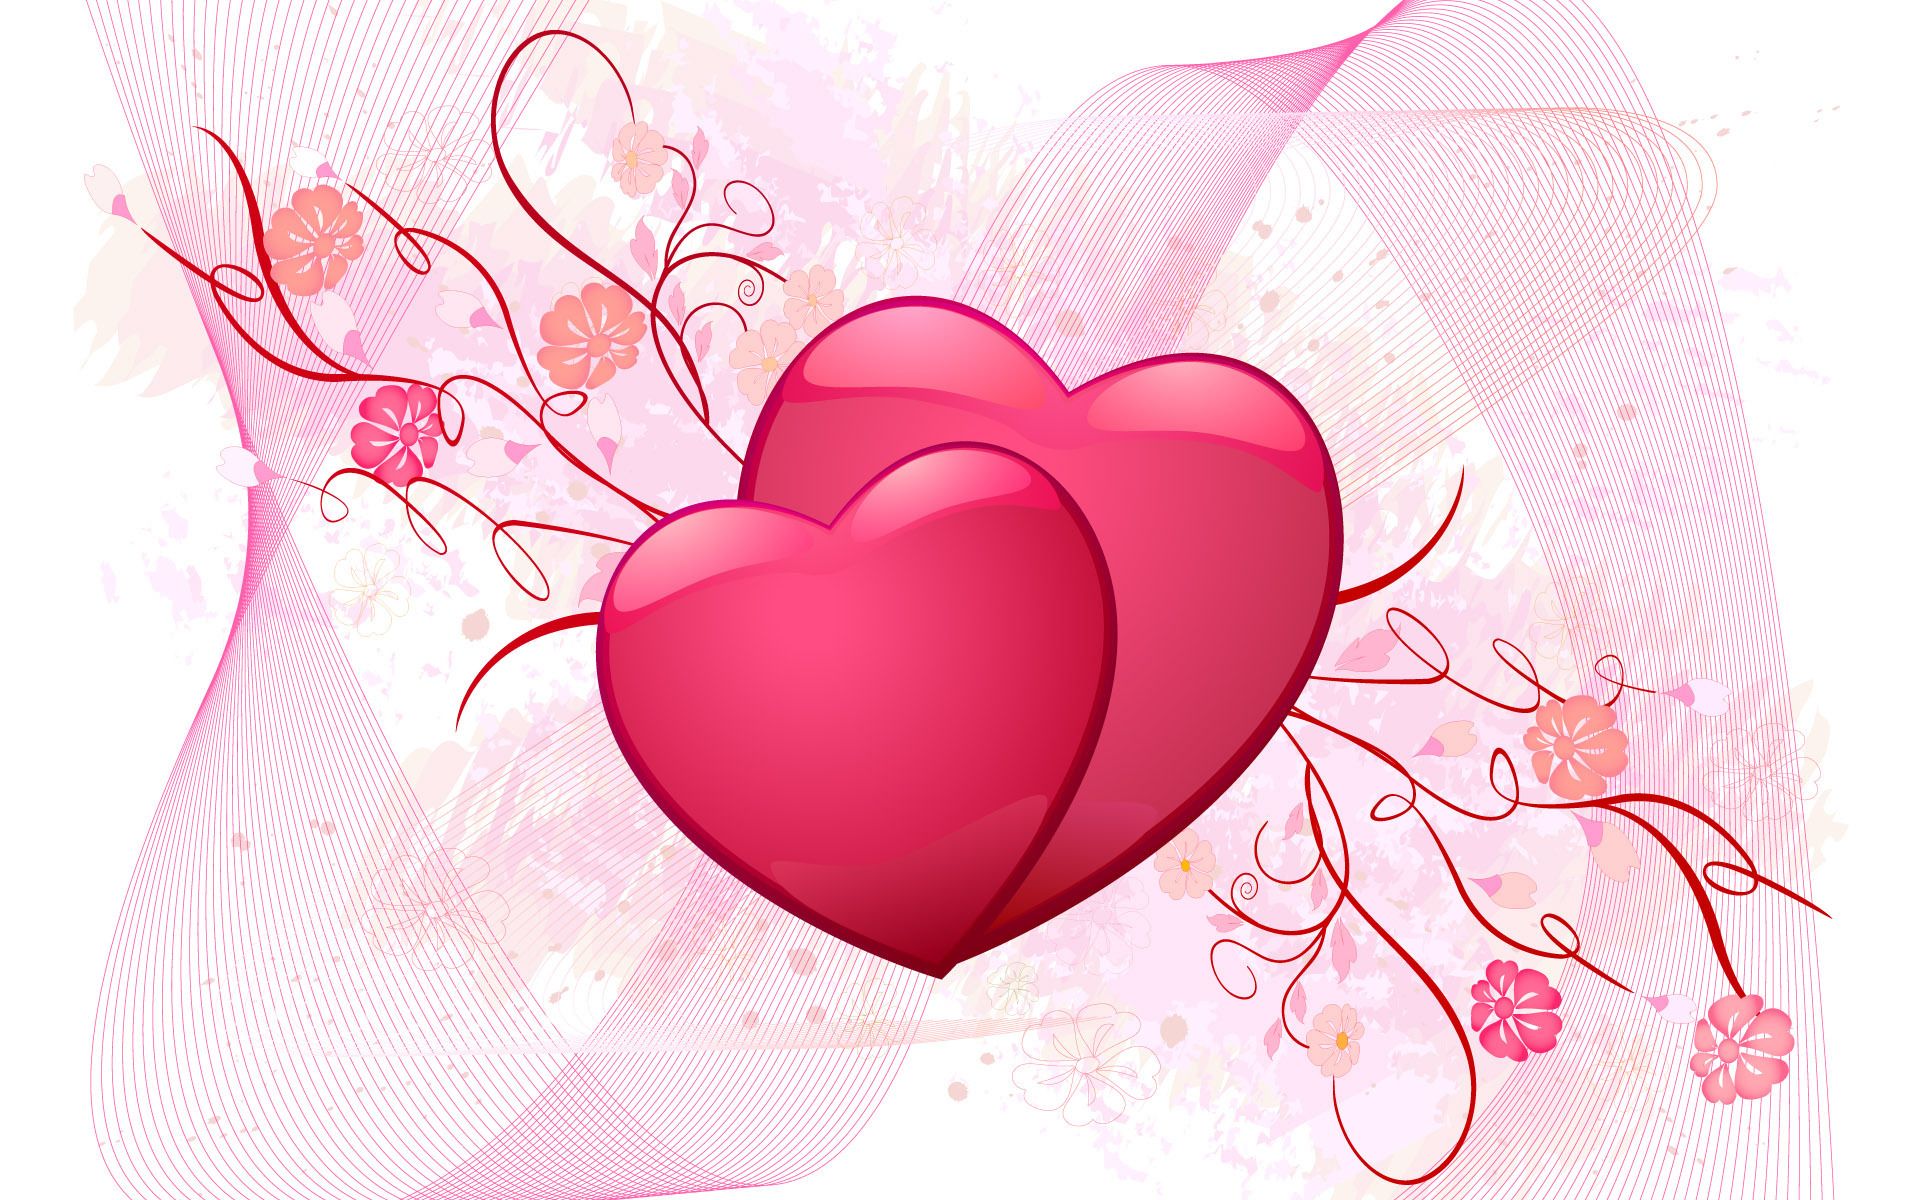 Love heart is so romantic wallpapers